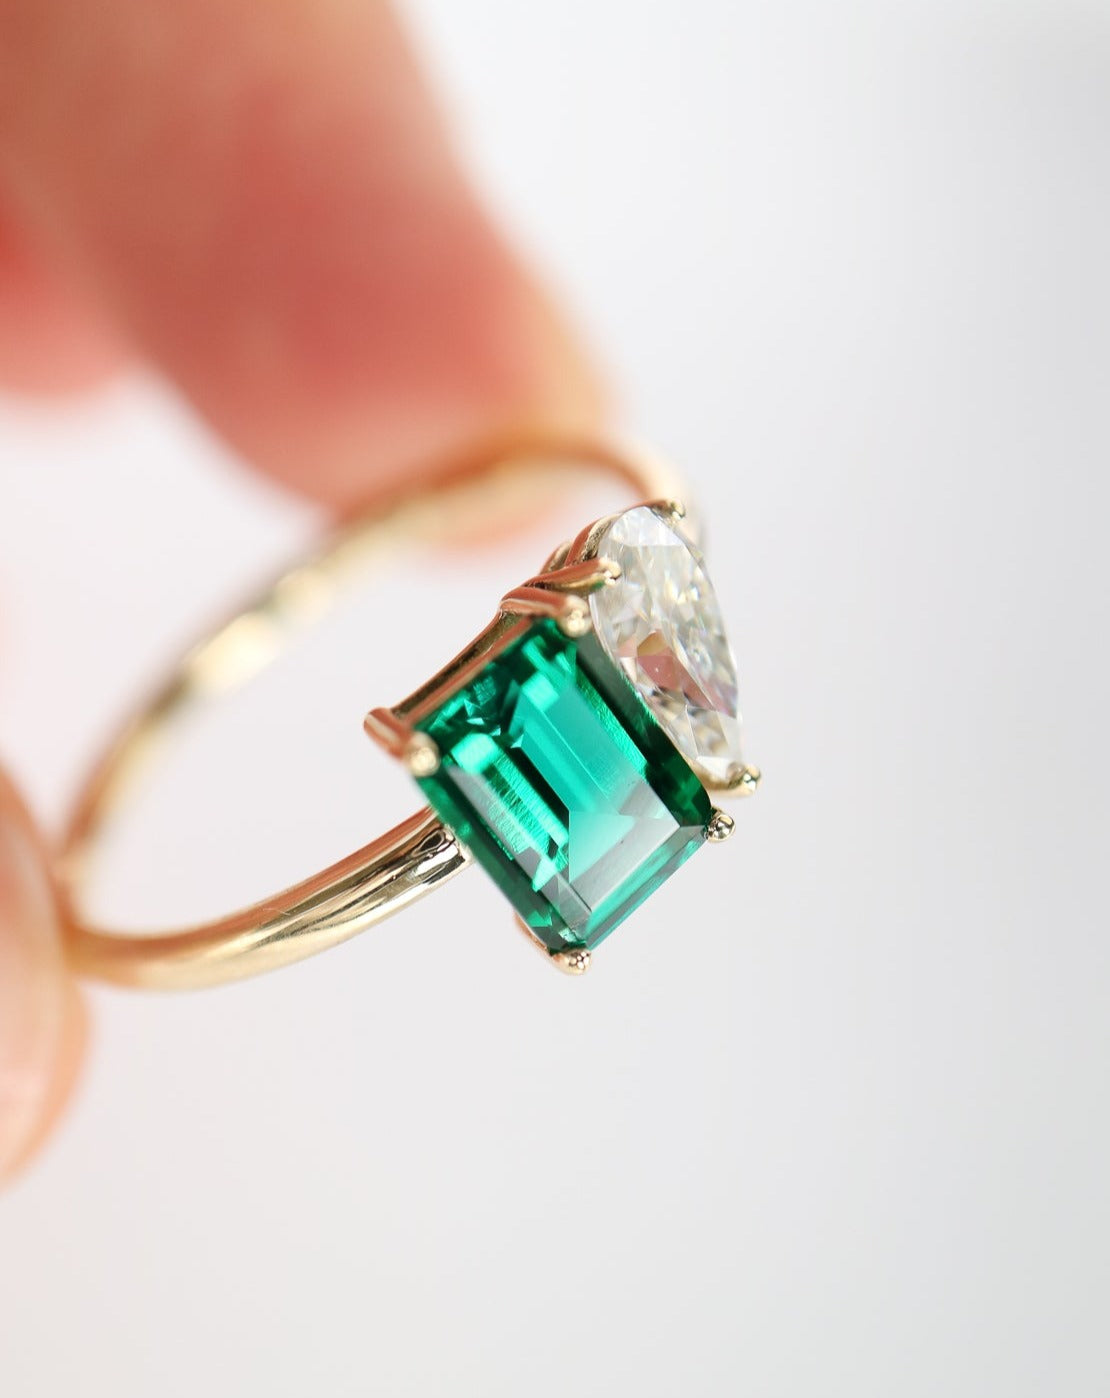 9kt gold Venus Ring with pear moissanite and emerald baguette from Theia Jewellery engagement rings